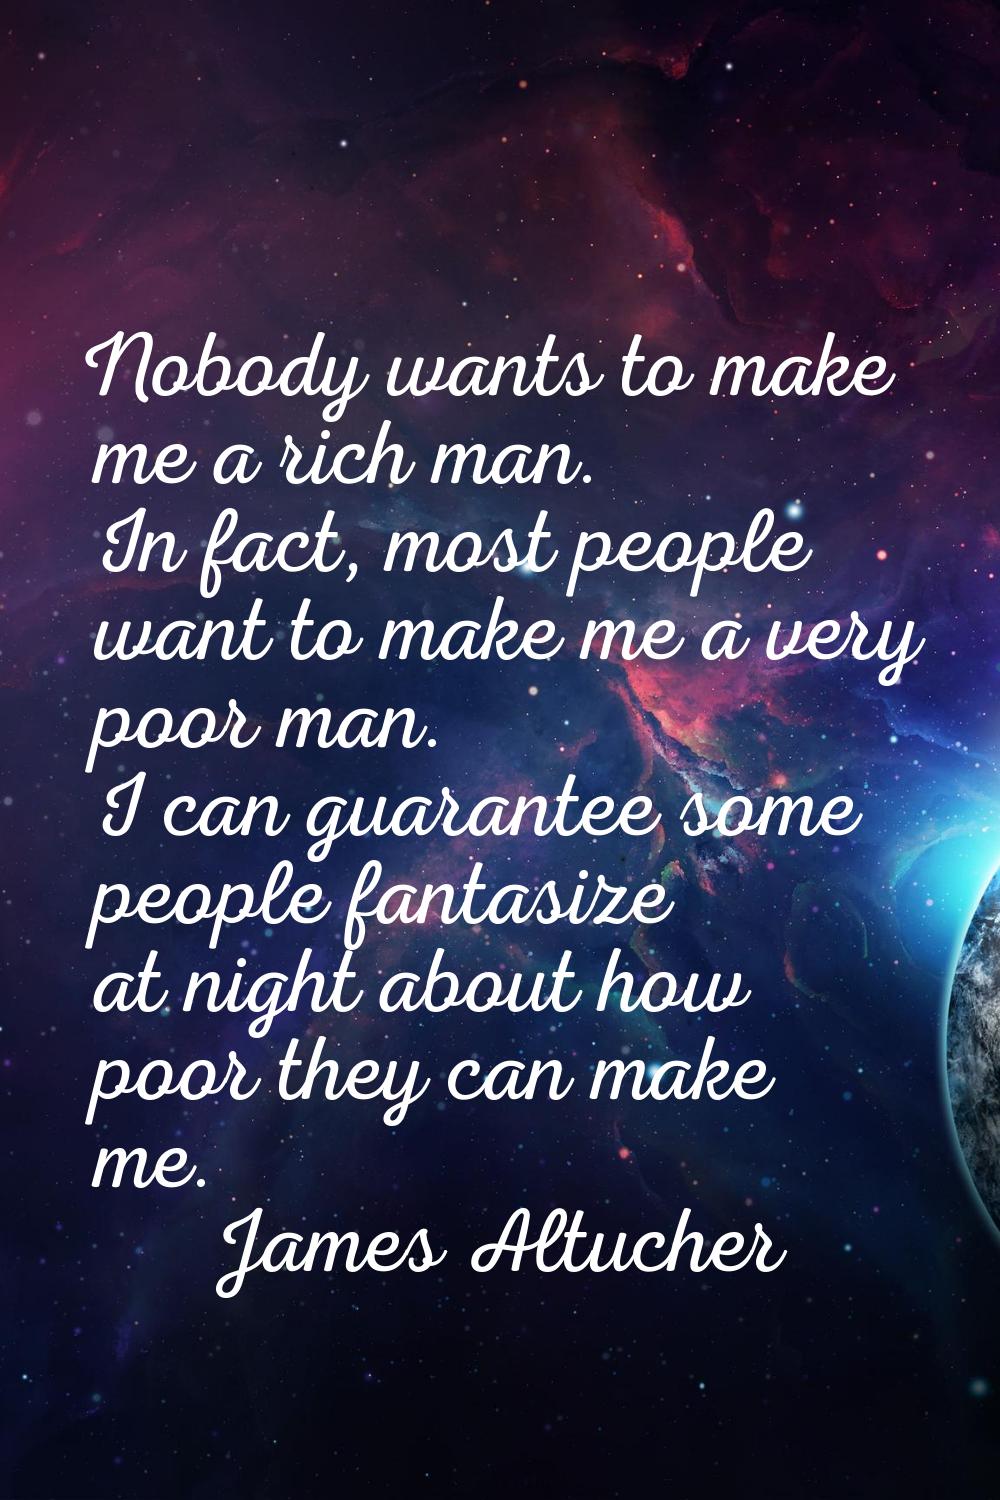 Nobody wants to make me a rich man. In fact, most people want to make me a very poor man. I can gua